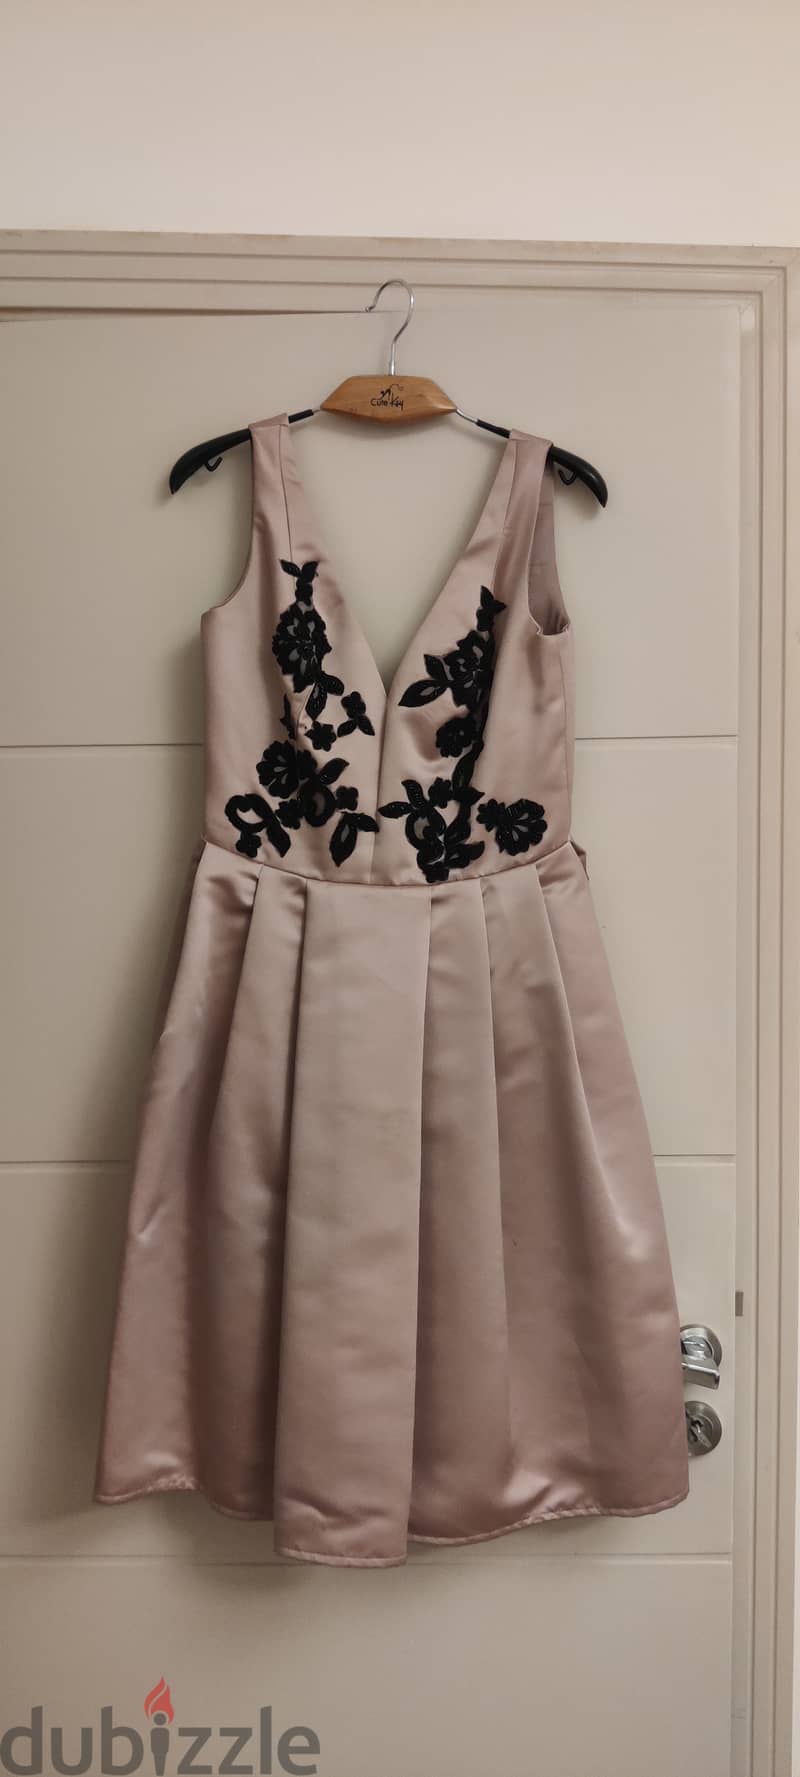 Elegant dress perfect for any special occasion! 0